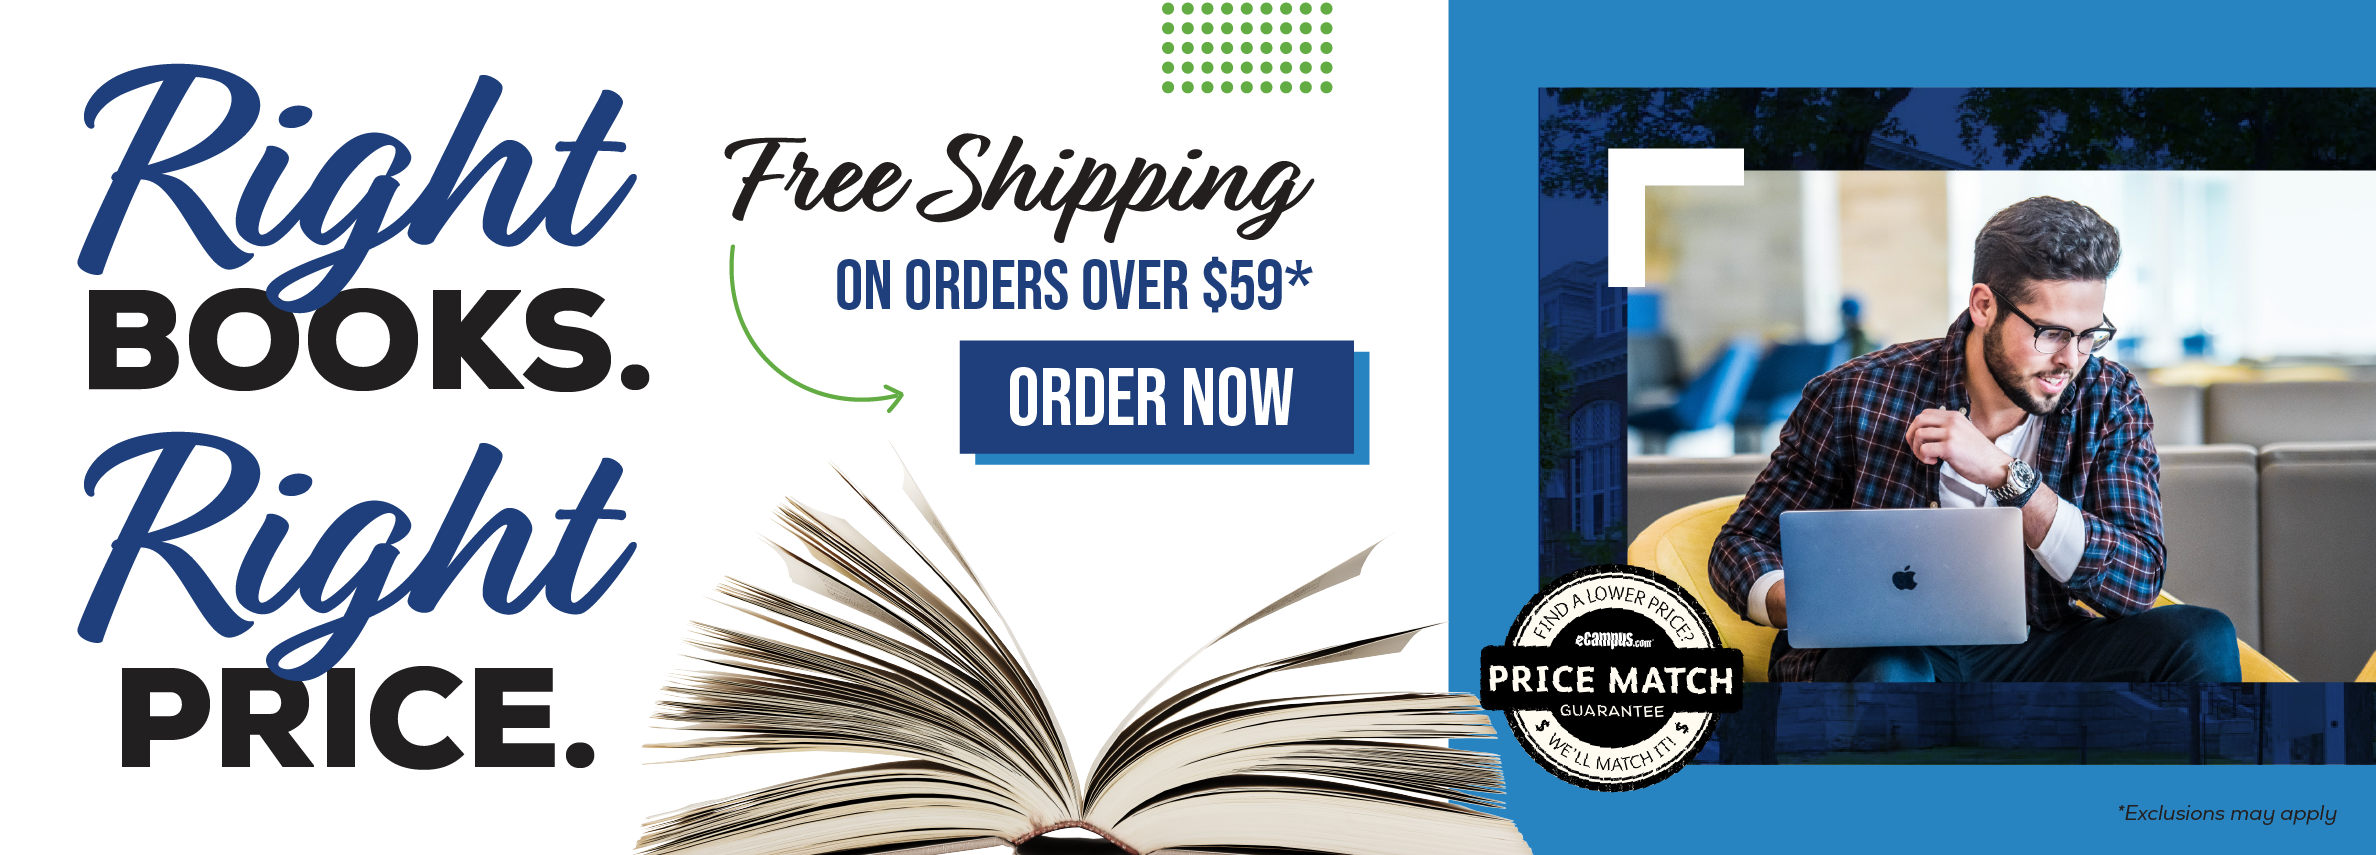 Right books. Right price. Free shipping on orders over $59.* Order now. Price Match Guarantee. *Exclusions may apply.